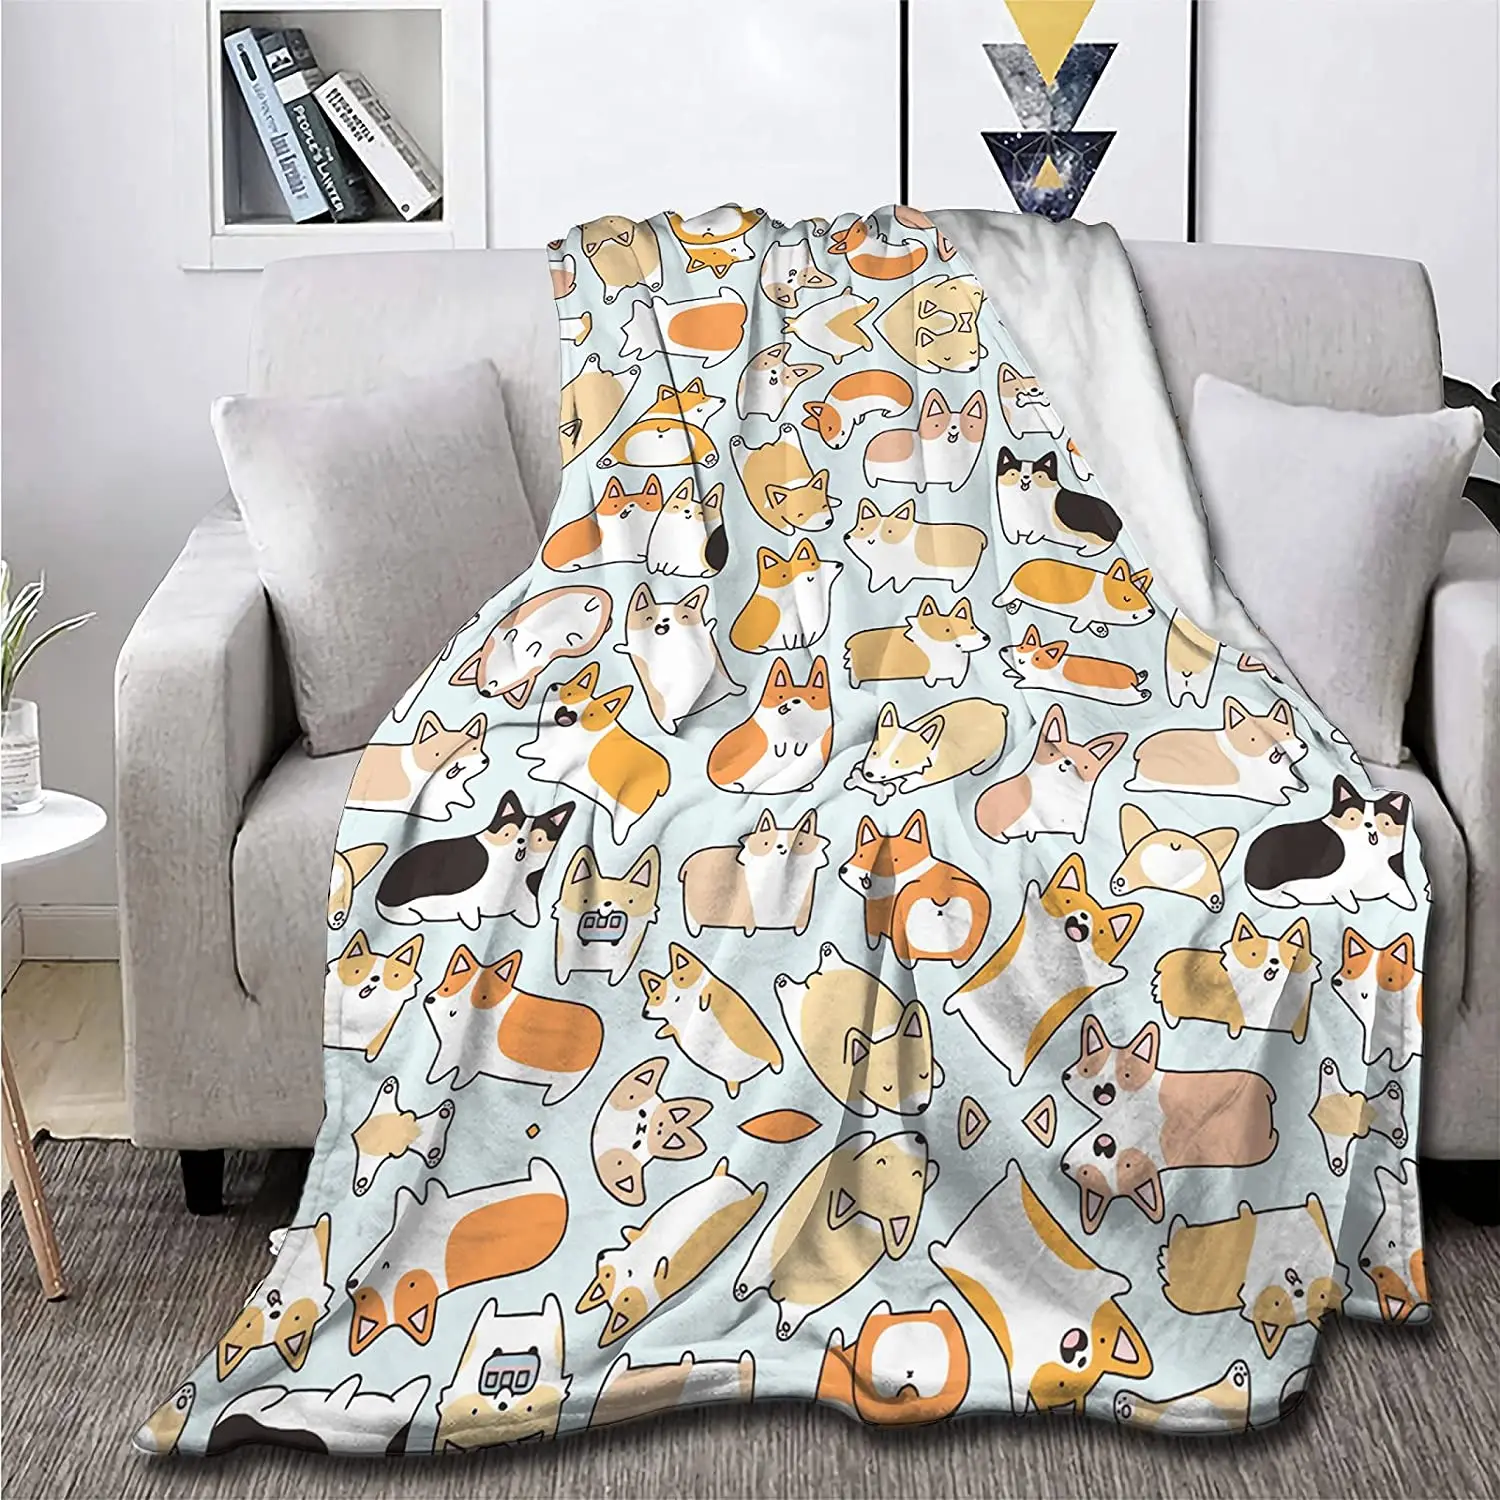 

Corgi Puppy Fleece Flannel Throw Blanket Travel Quilt Warm Lightweight Plush Blanket for Couch Bed Sofa Car Living Room for Kid